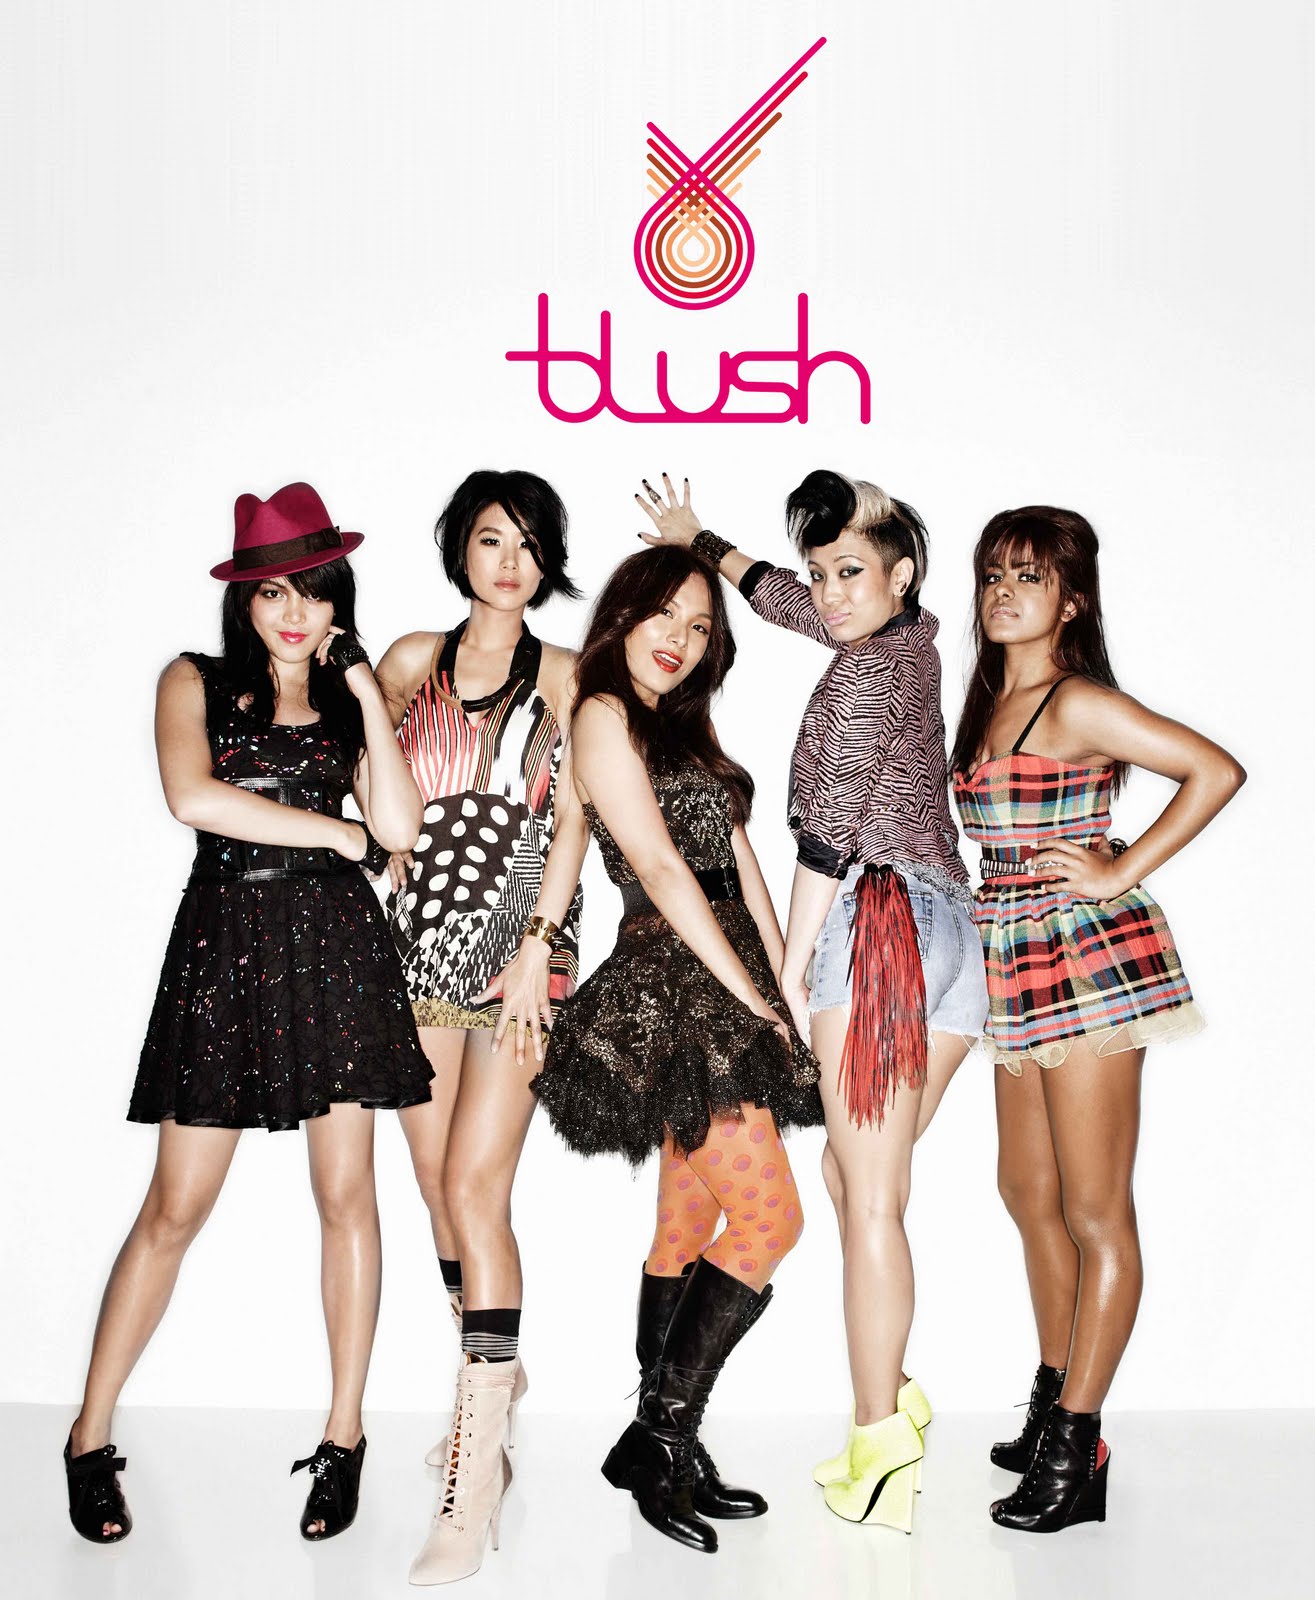 Blush Doing What No Asian Girl Group Has Done Before Pop Reviews Now